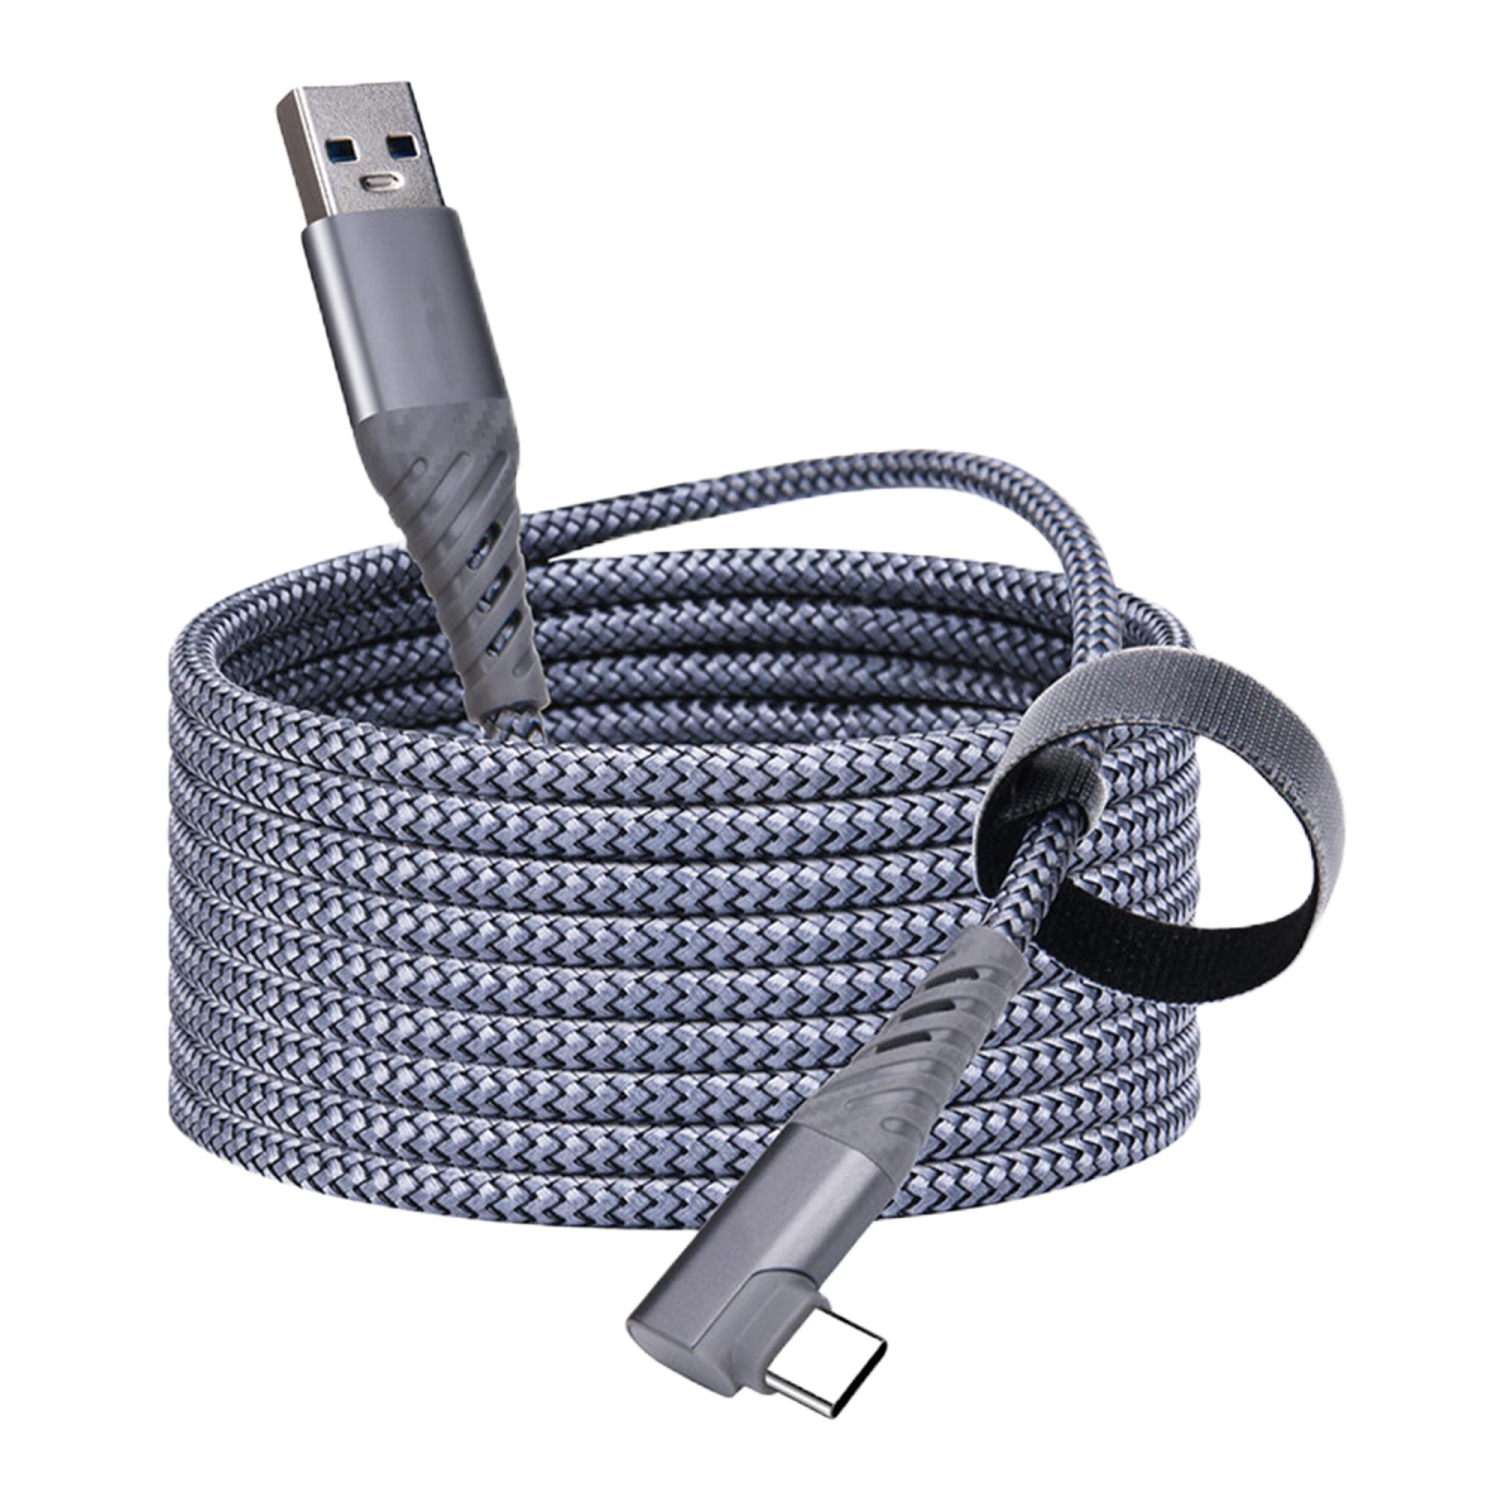 The Bigly Brothers 16ft(5m) Link Cable for Oculus Quest 2/1, USB 3.0 to USB C Cable, 90 Degree Braided Fast Charging & 5Gbps Data Transfer for VR Headset/PC/Laptop/Tablet/Phone